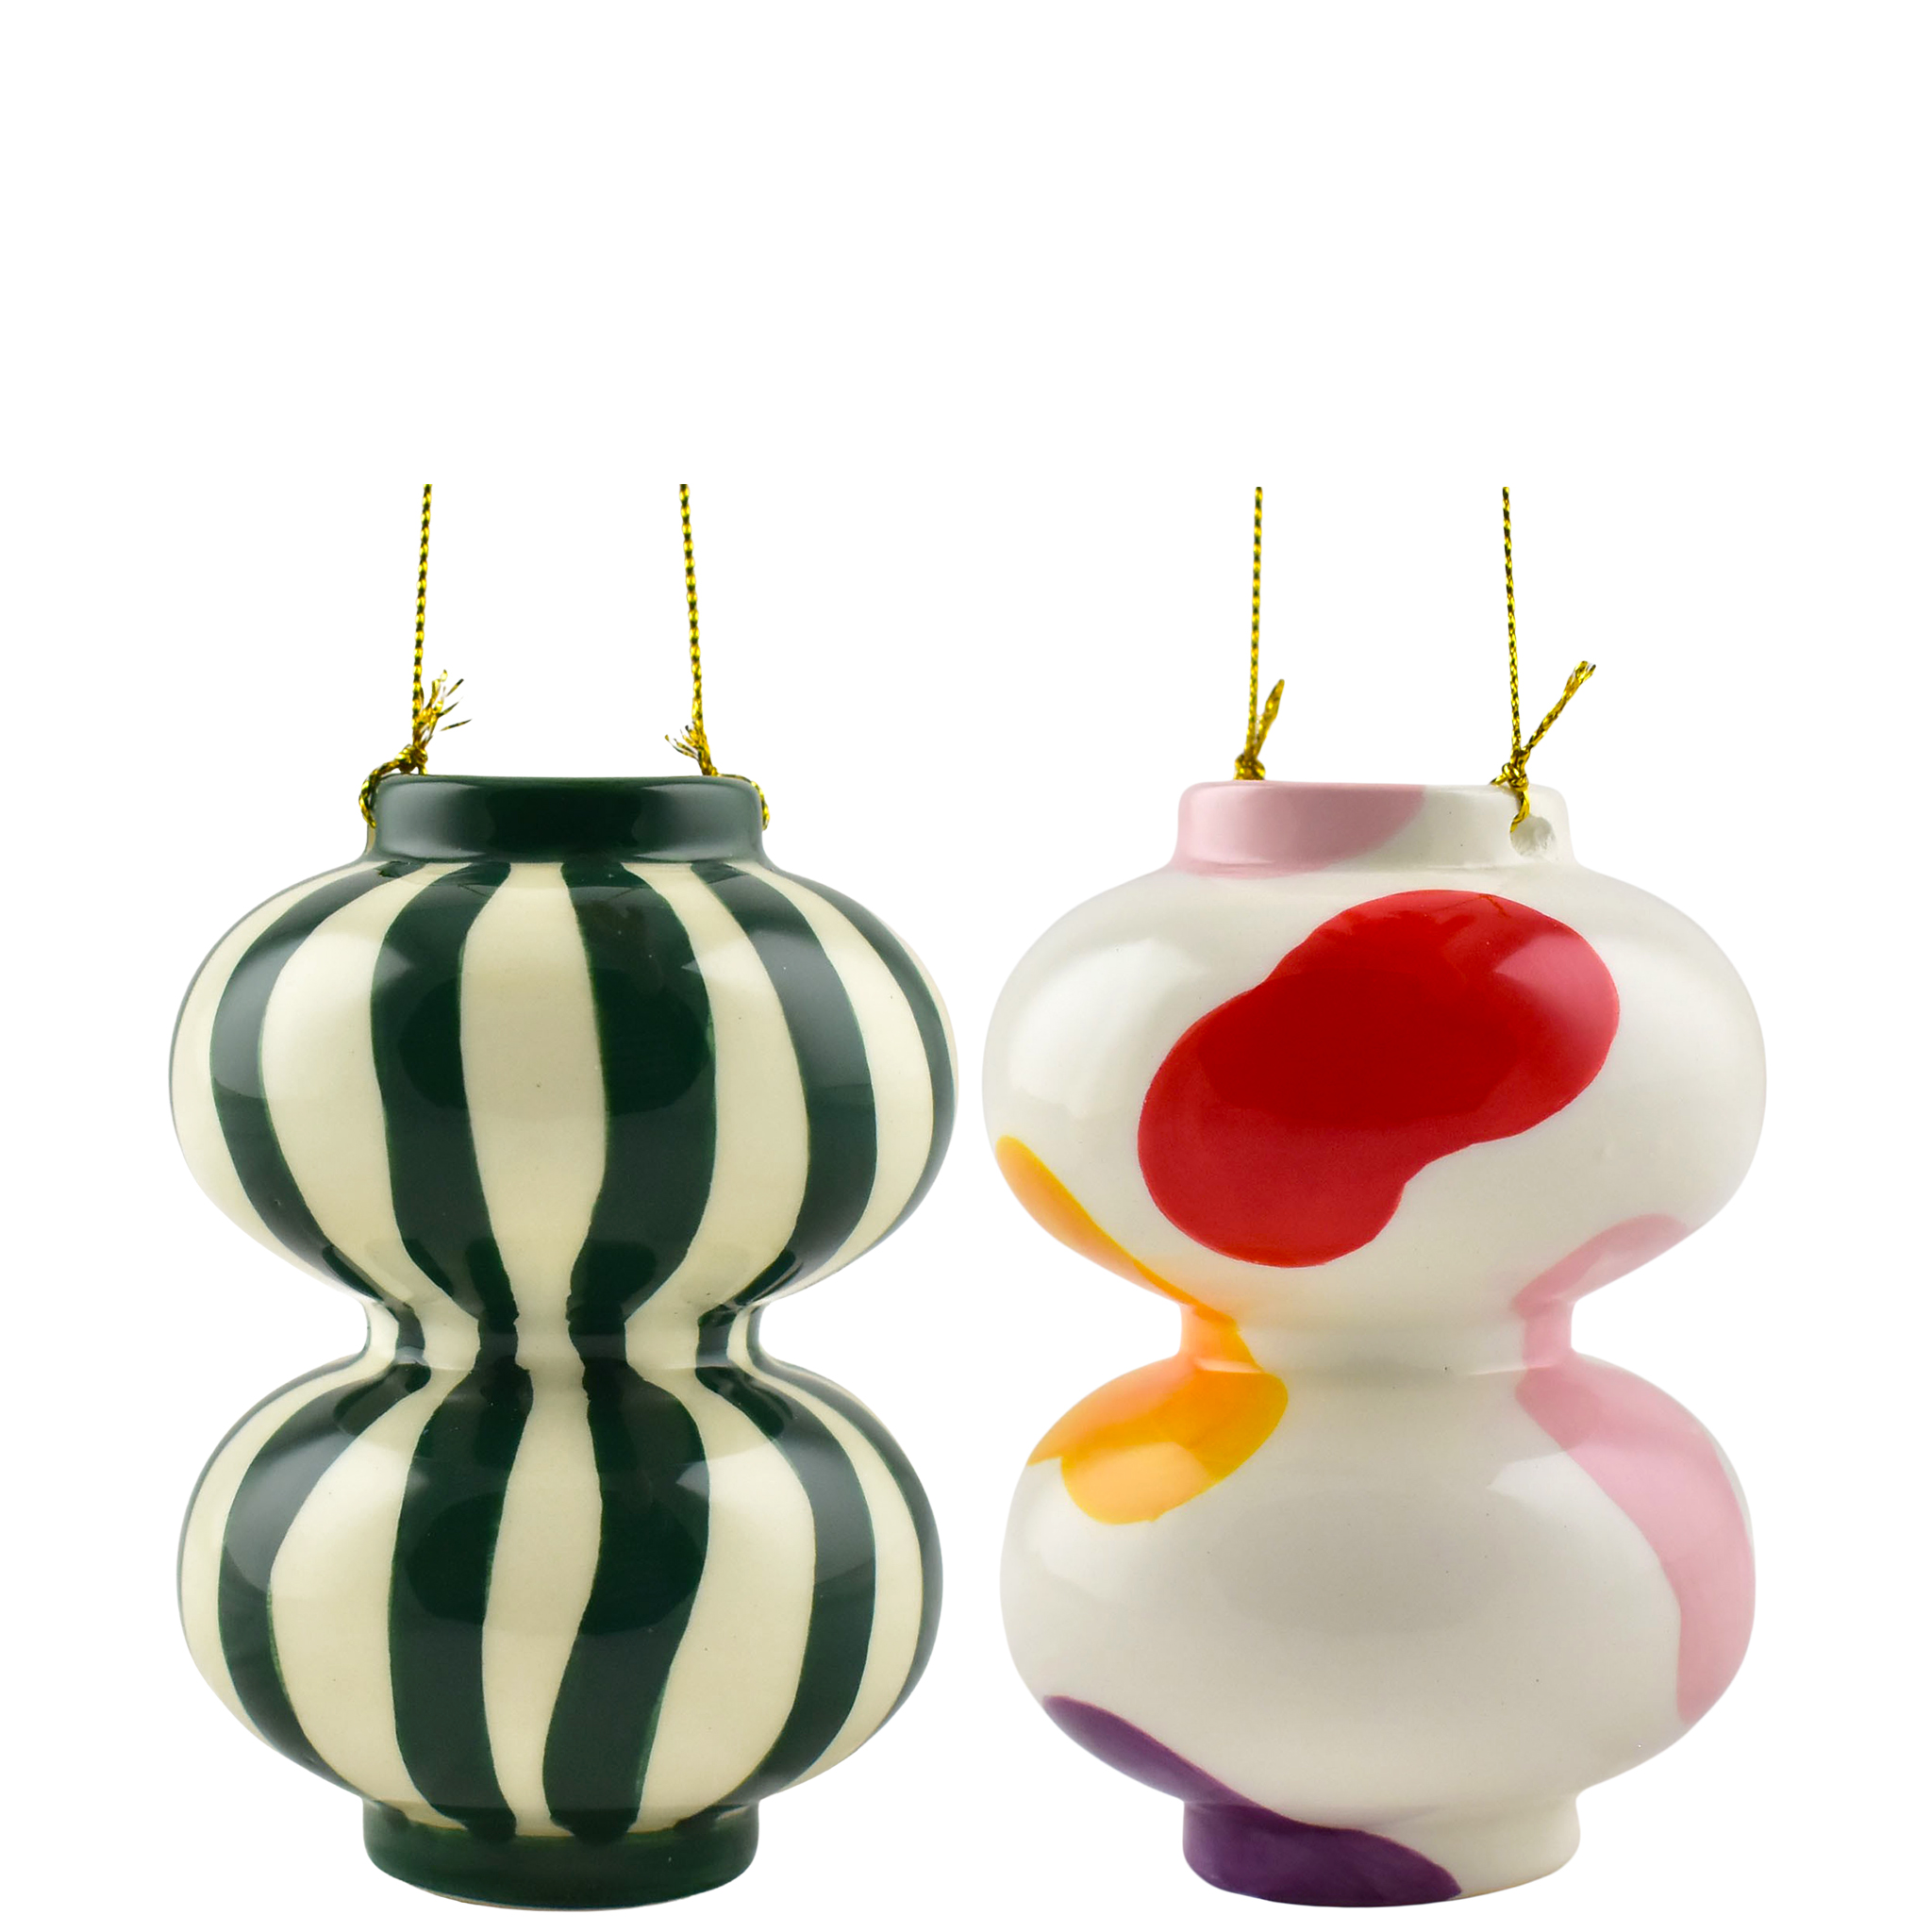 Augusto Vase Christmas Ornaments - 2 Assorted Gift